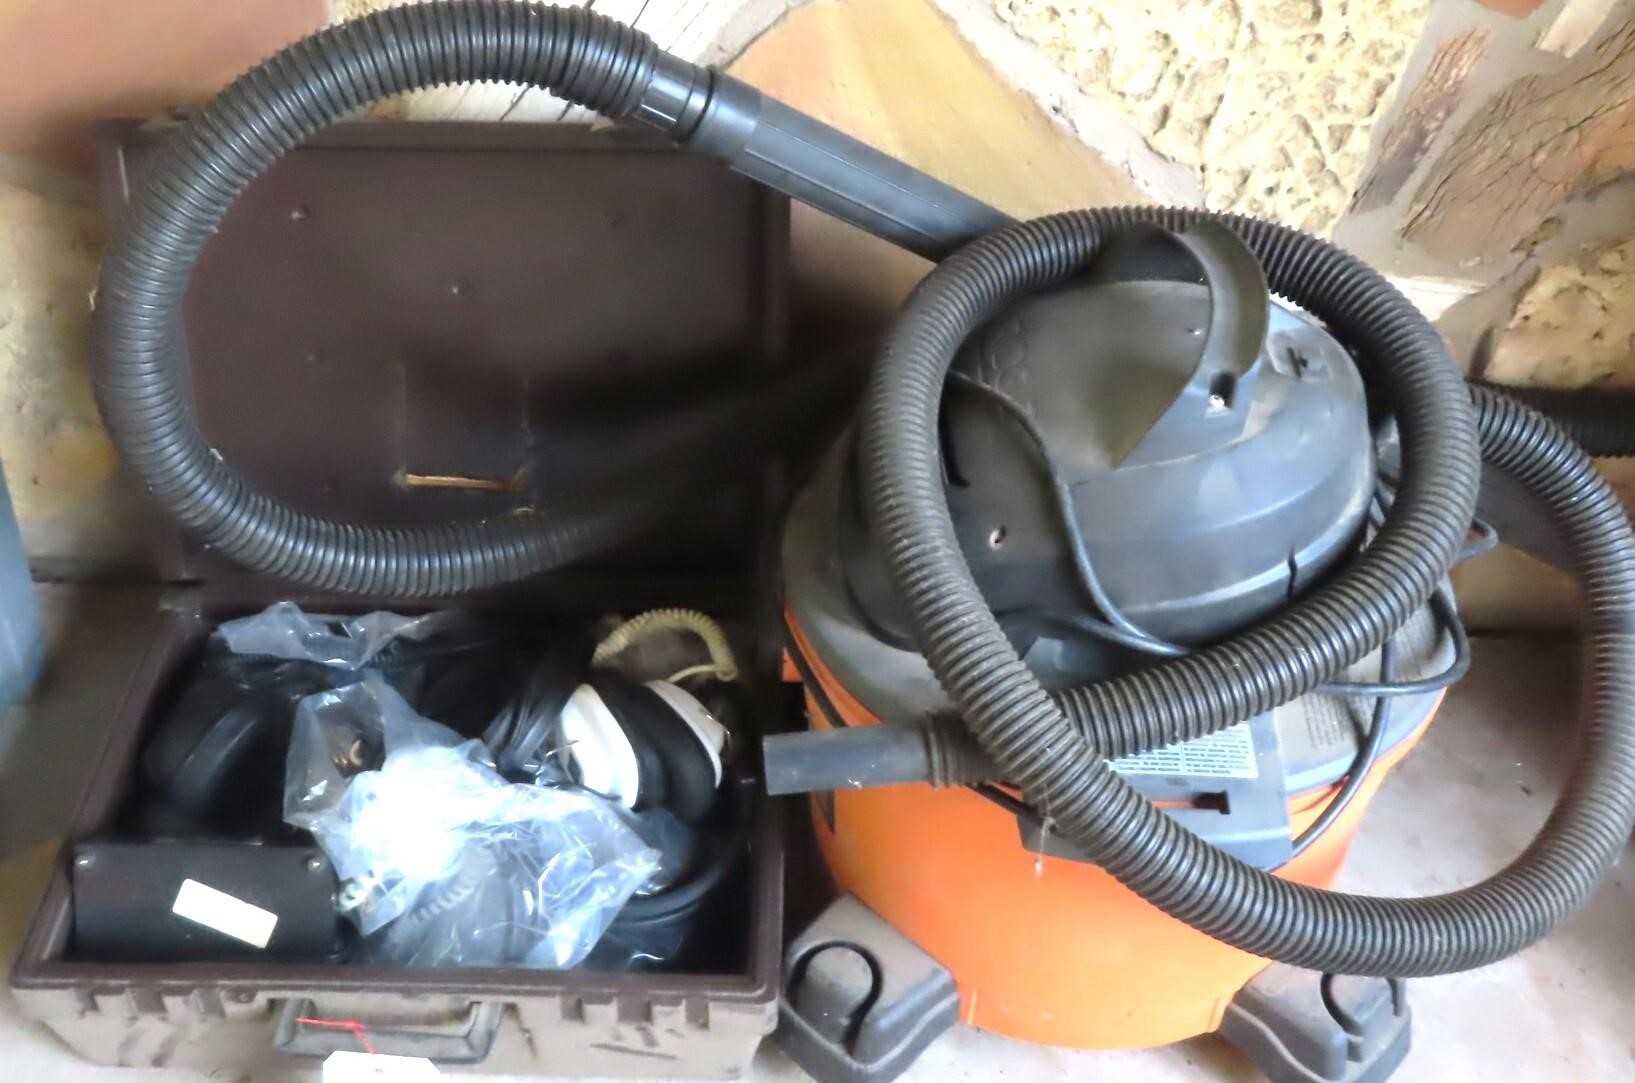 Ear Protection (box of) and Wet Dry Vac